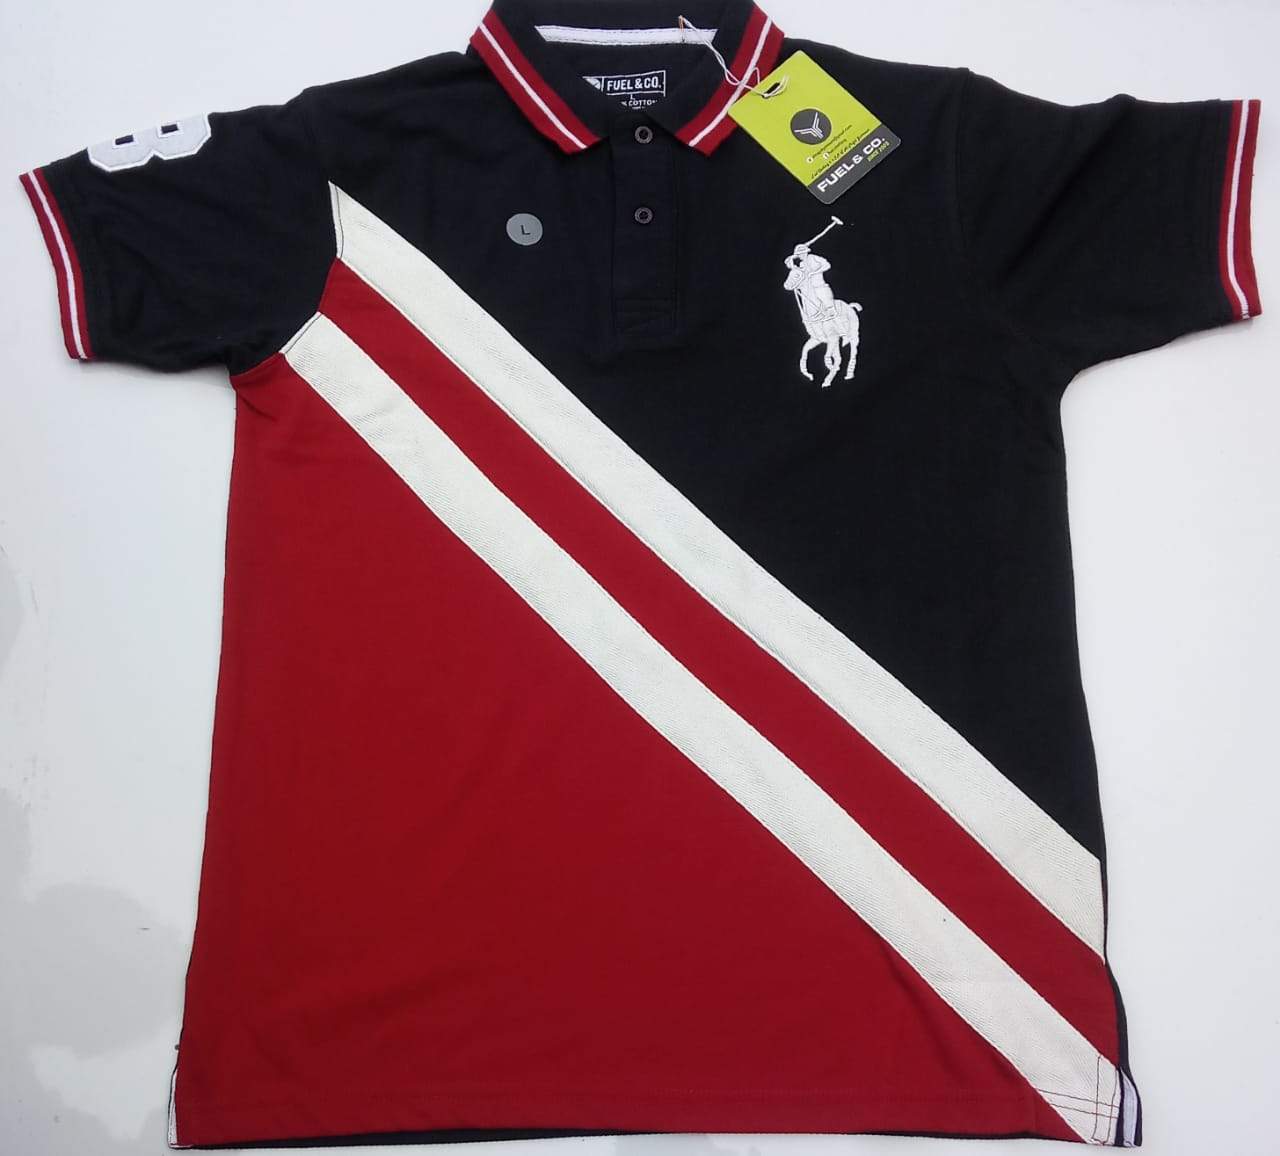 Polo t shirt online price in pakistan - Random Apparel and Clothing